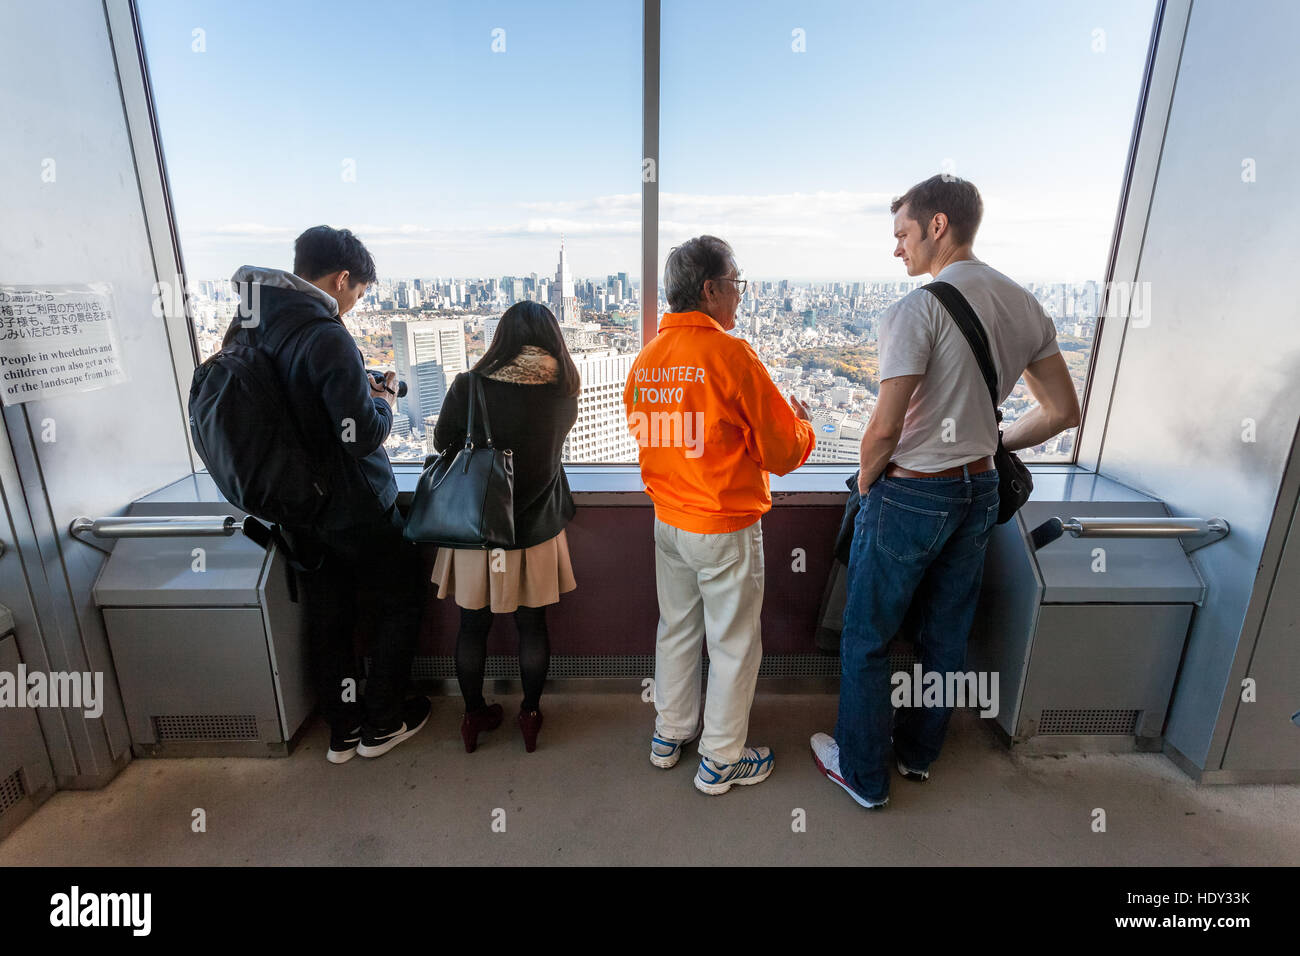 A volunteer tourist guide (in orange jacket) guides a white male tourist around the 45th floor Observation deck of the TMG tower. Shinjuku, Tokyo, Japan Stock Photo